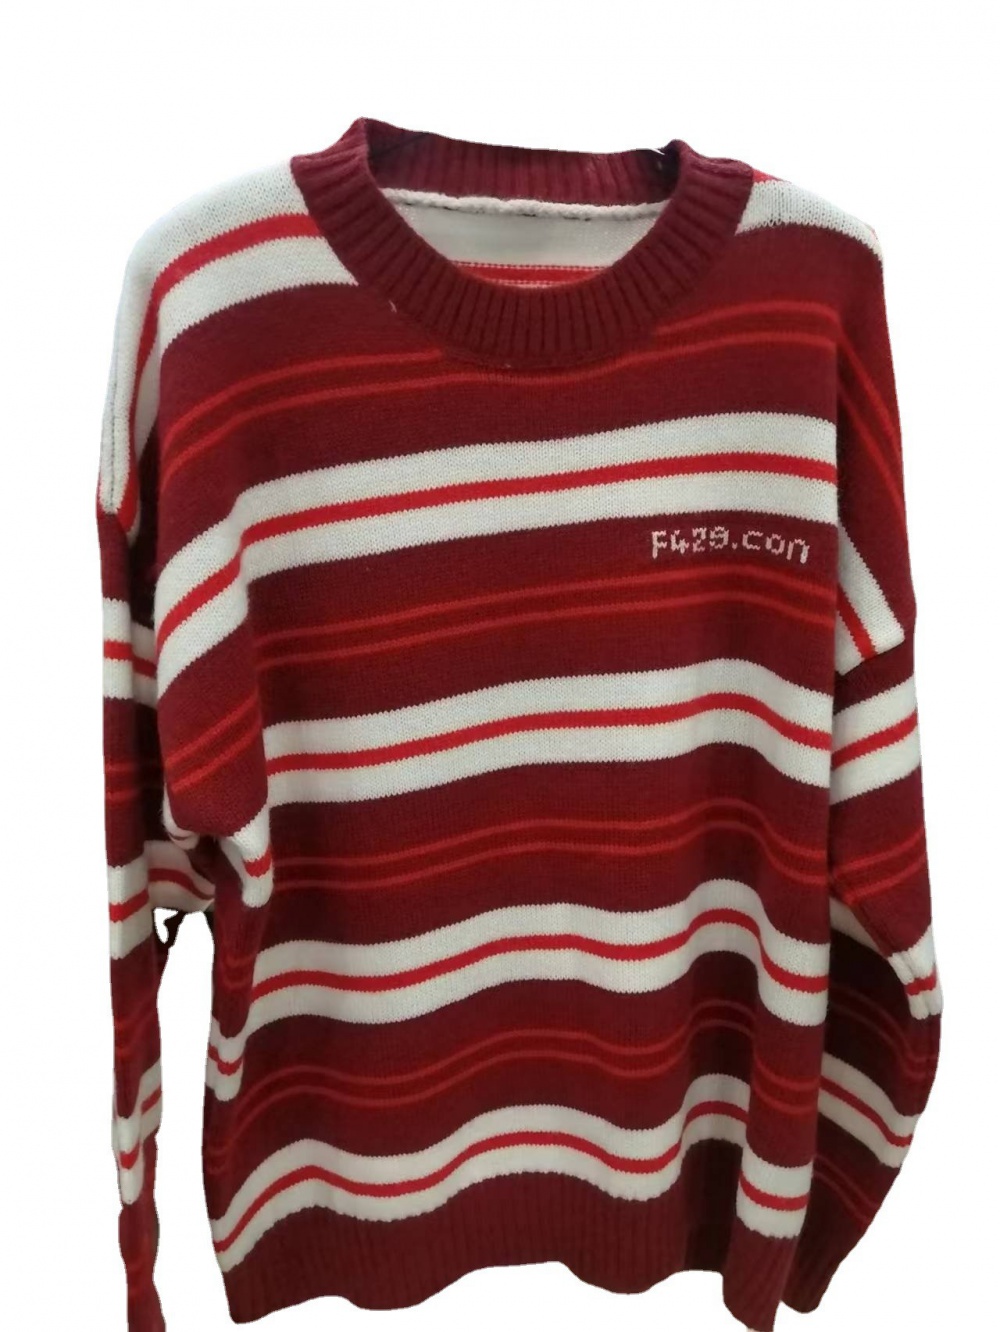 Round neck autumn sweater red long sleeve tops for women